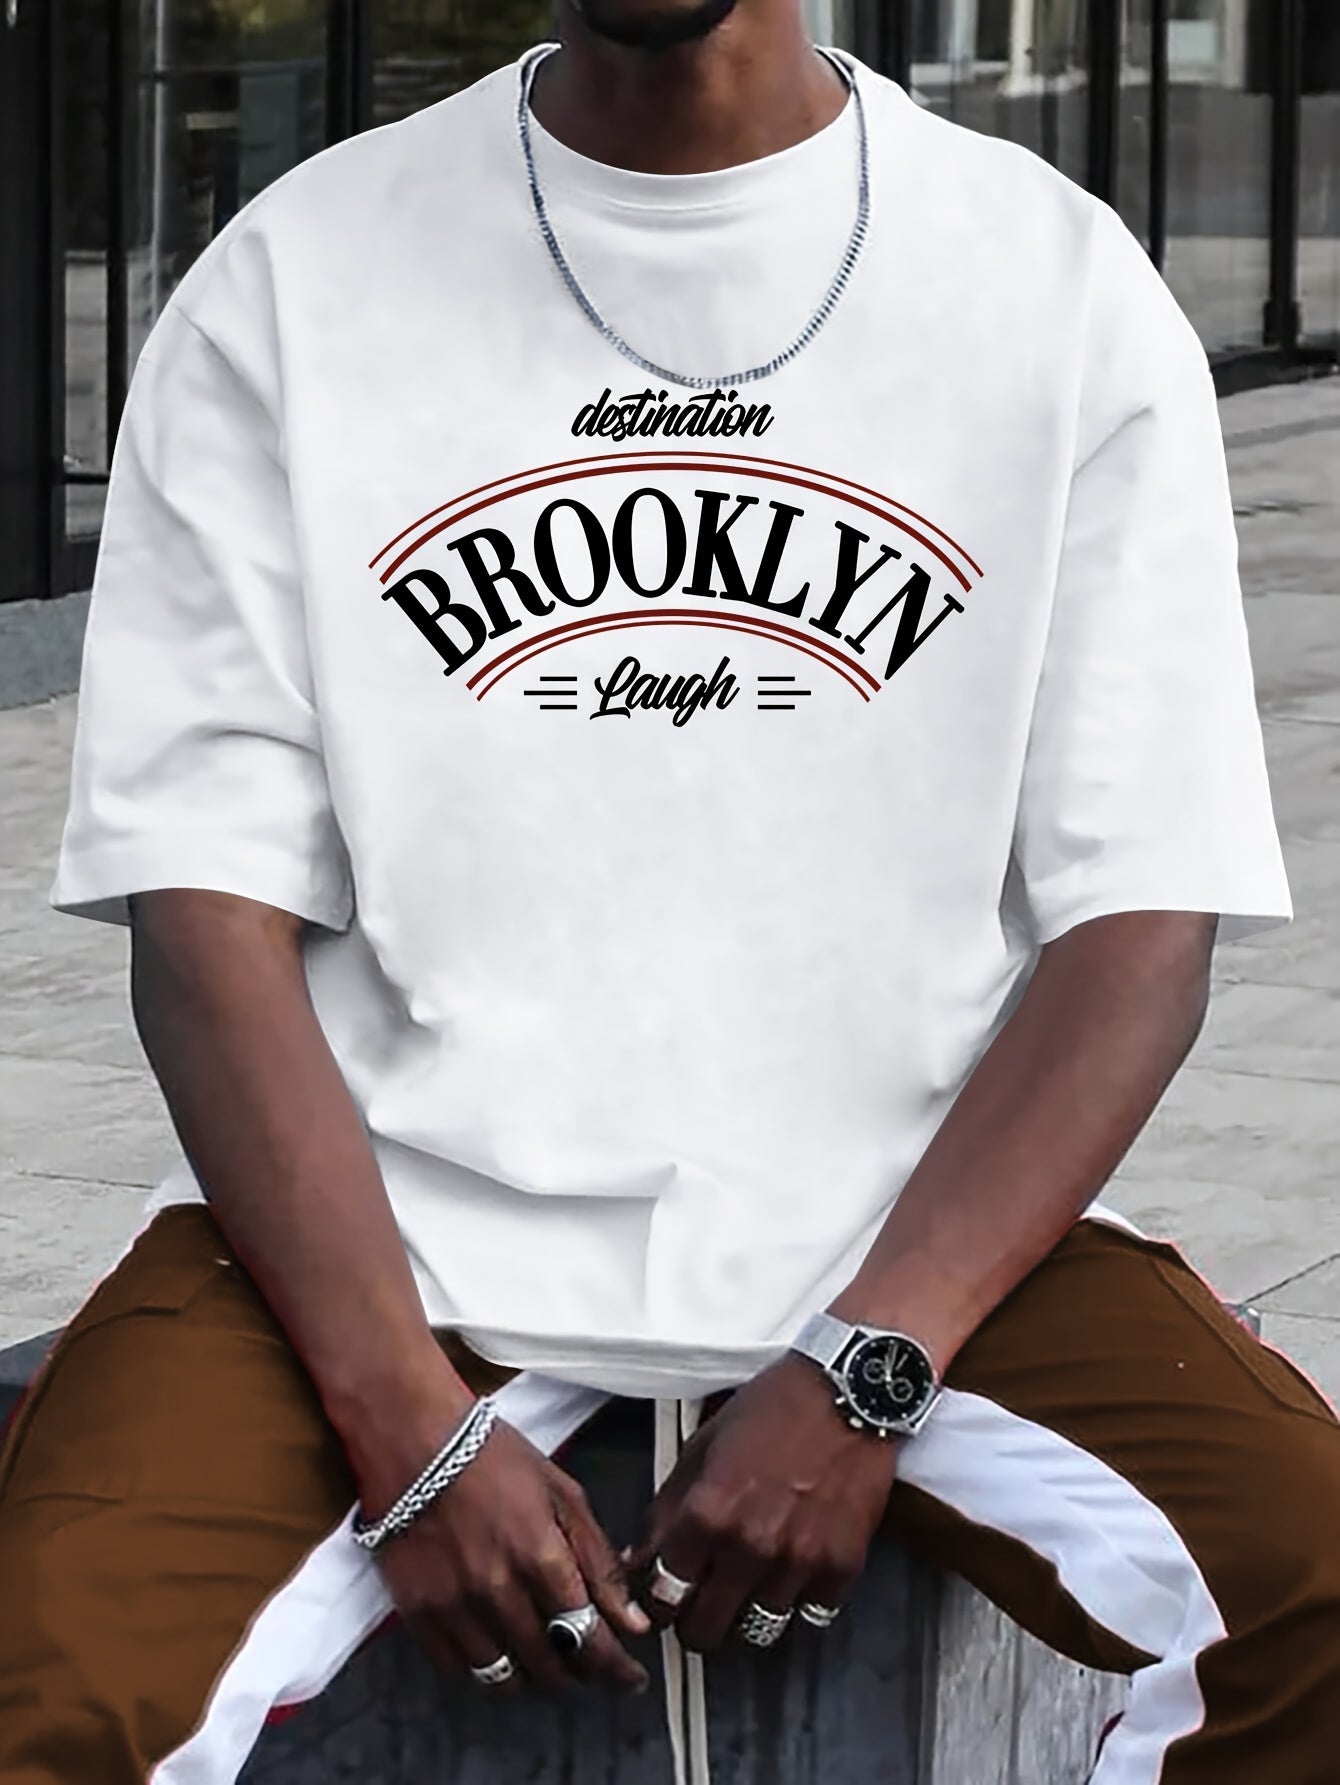 Summer Graphic Print T-Shirt for Men with Brooklyn Design - Casual Outdoor Wear